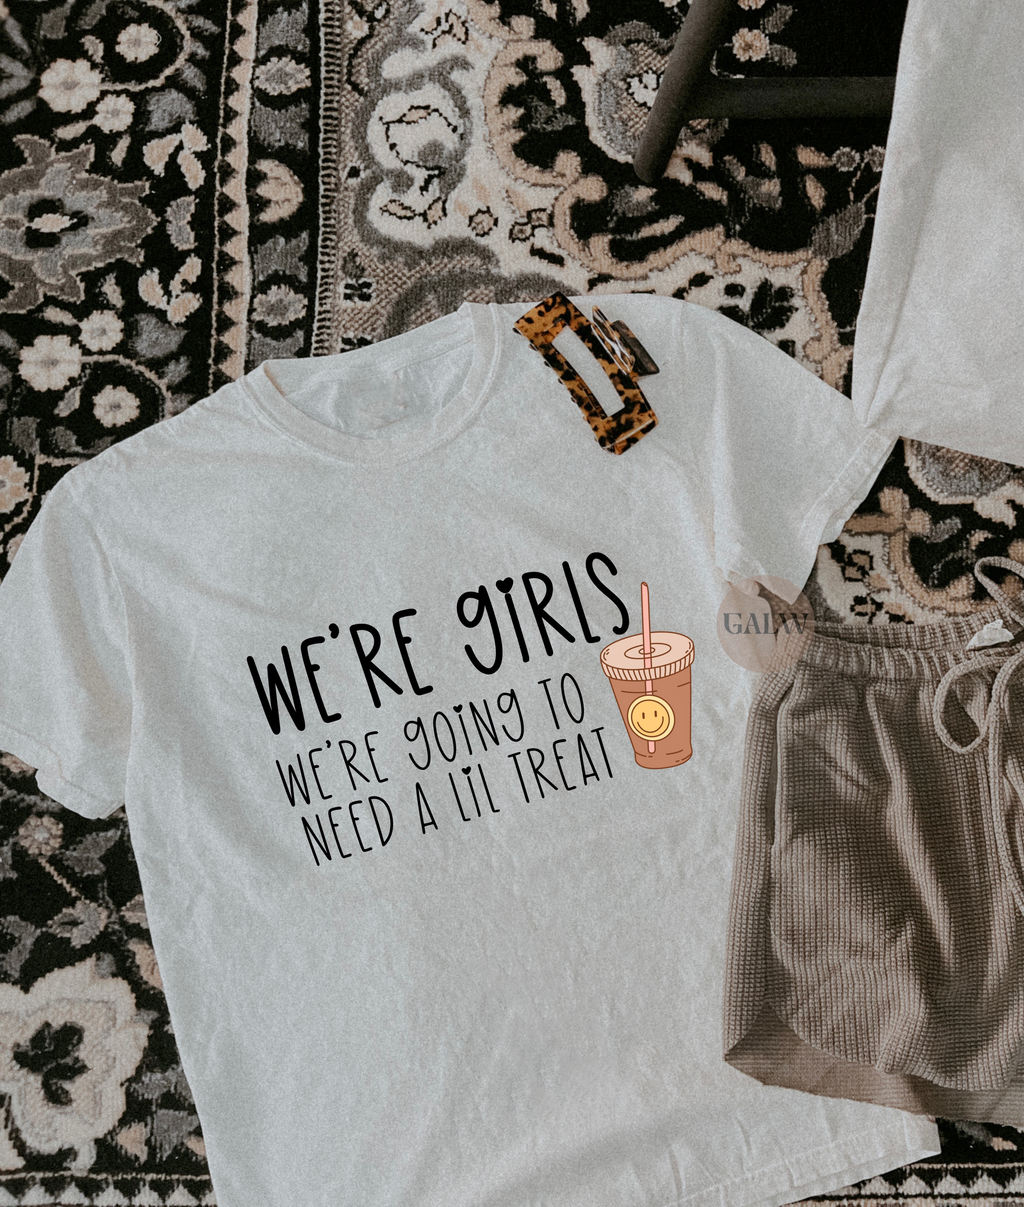 We're girls we're going to need a lil treat design tee or sweatshirt